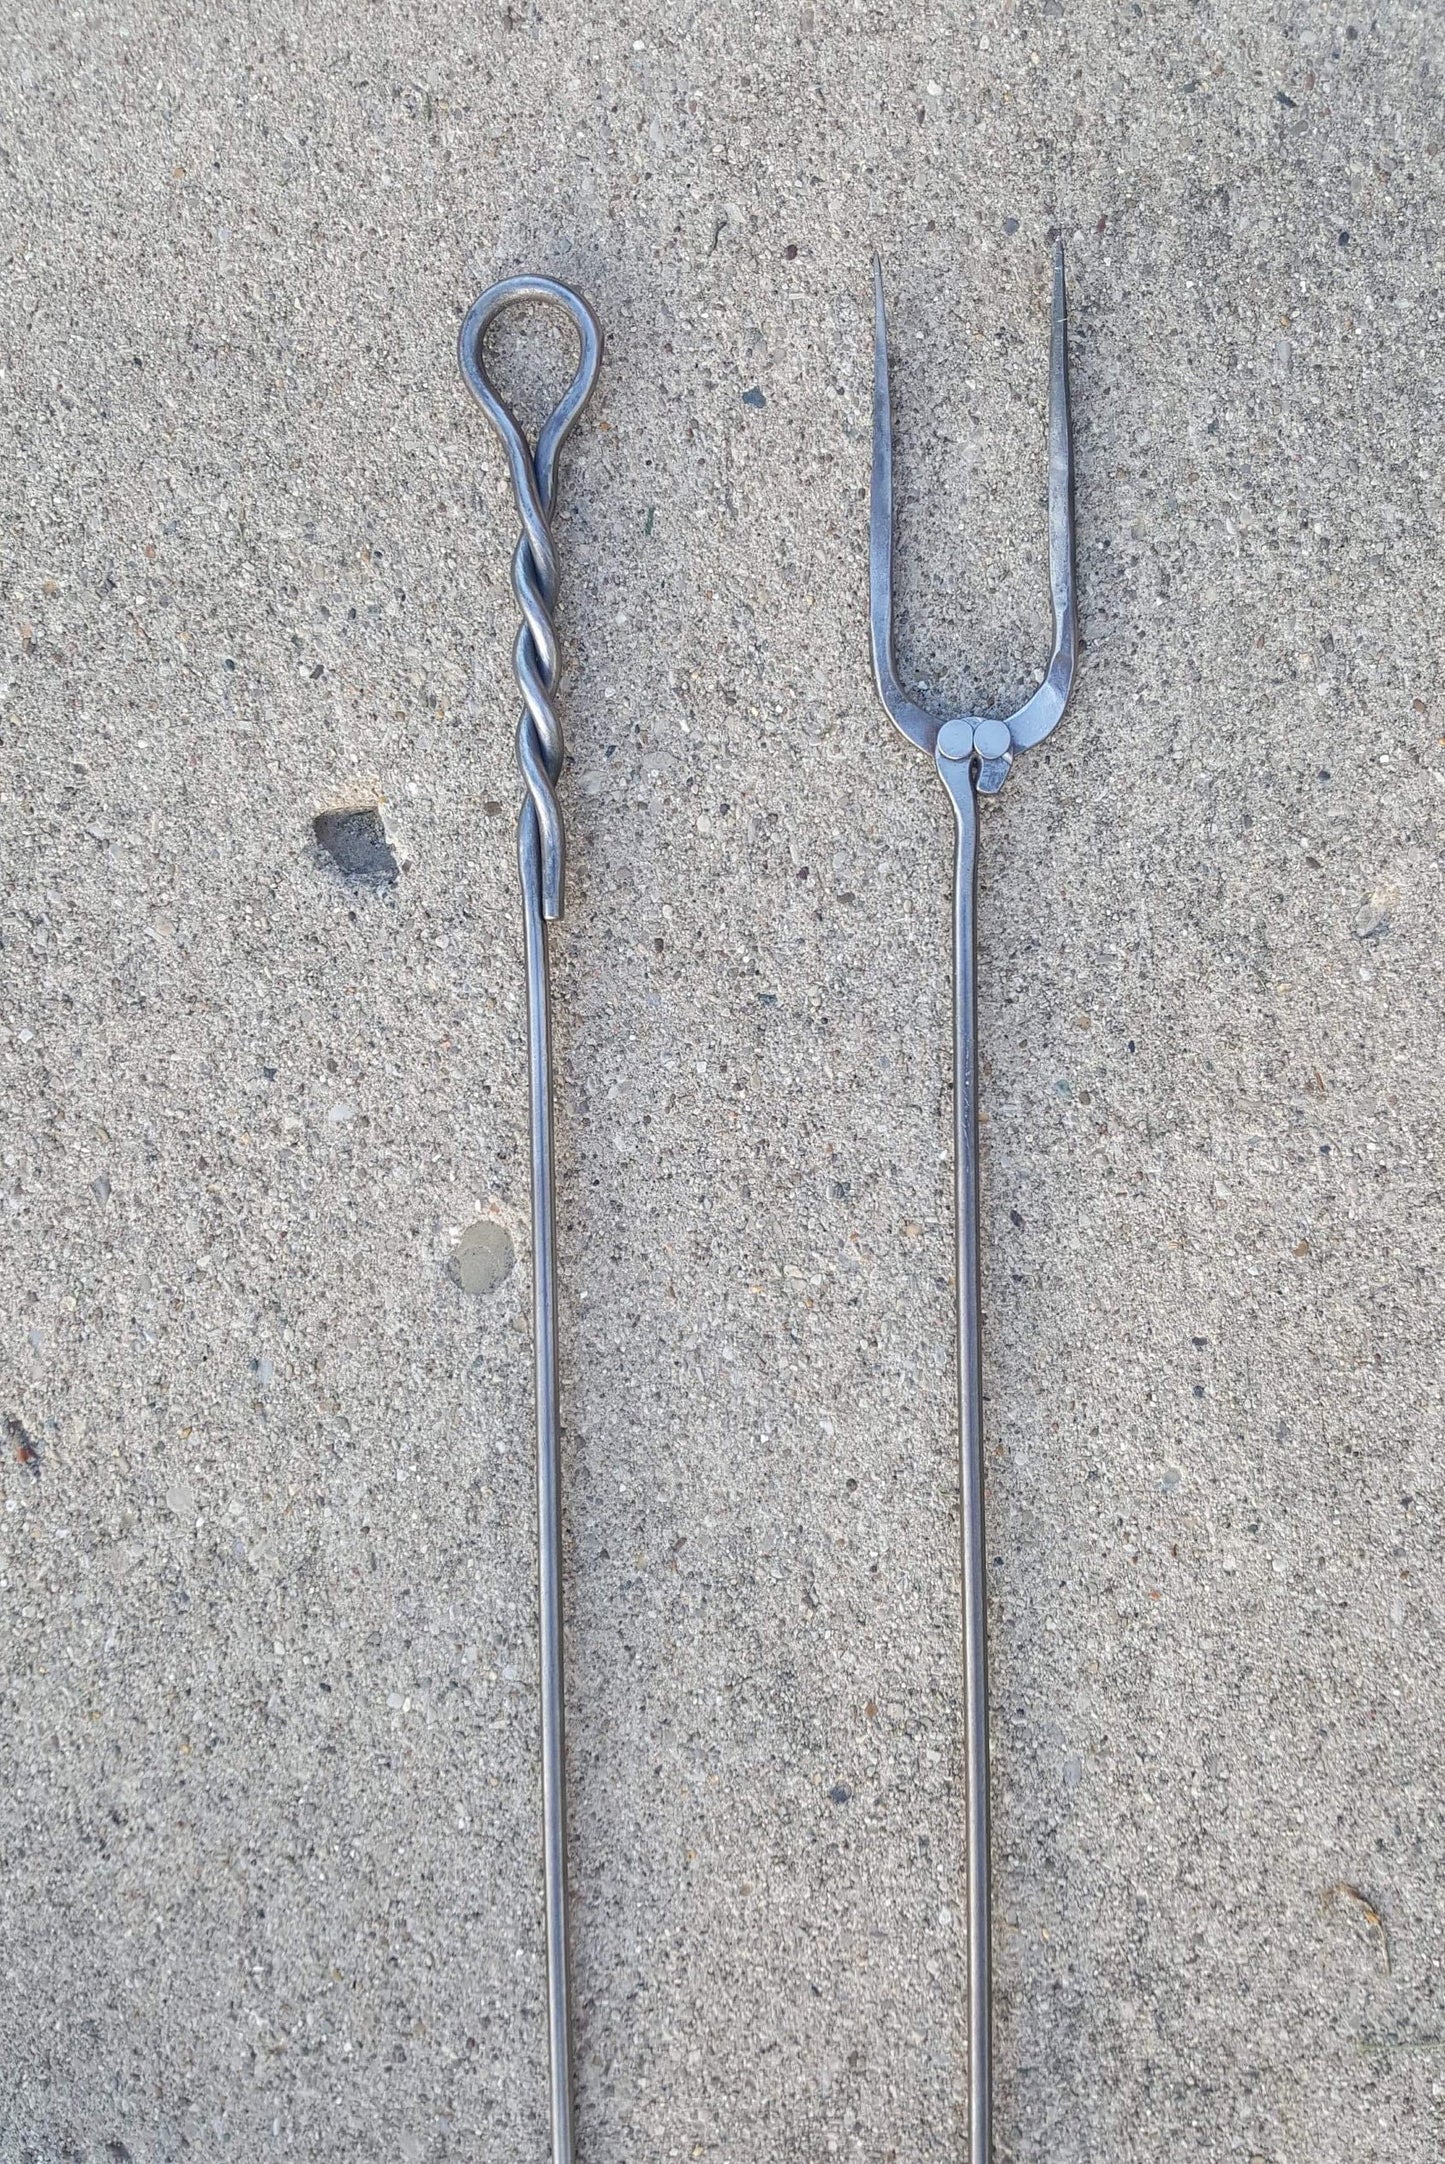 Roasting Fork for Campfire Weenie/Marshmallow  - Hand Forged, BBQ Fork, Hot Dog Roaster, Roasting Stick